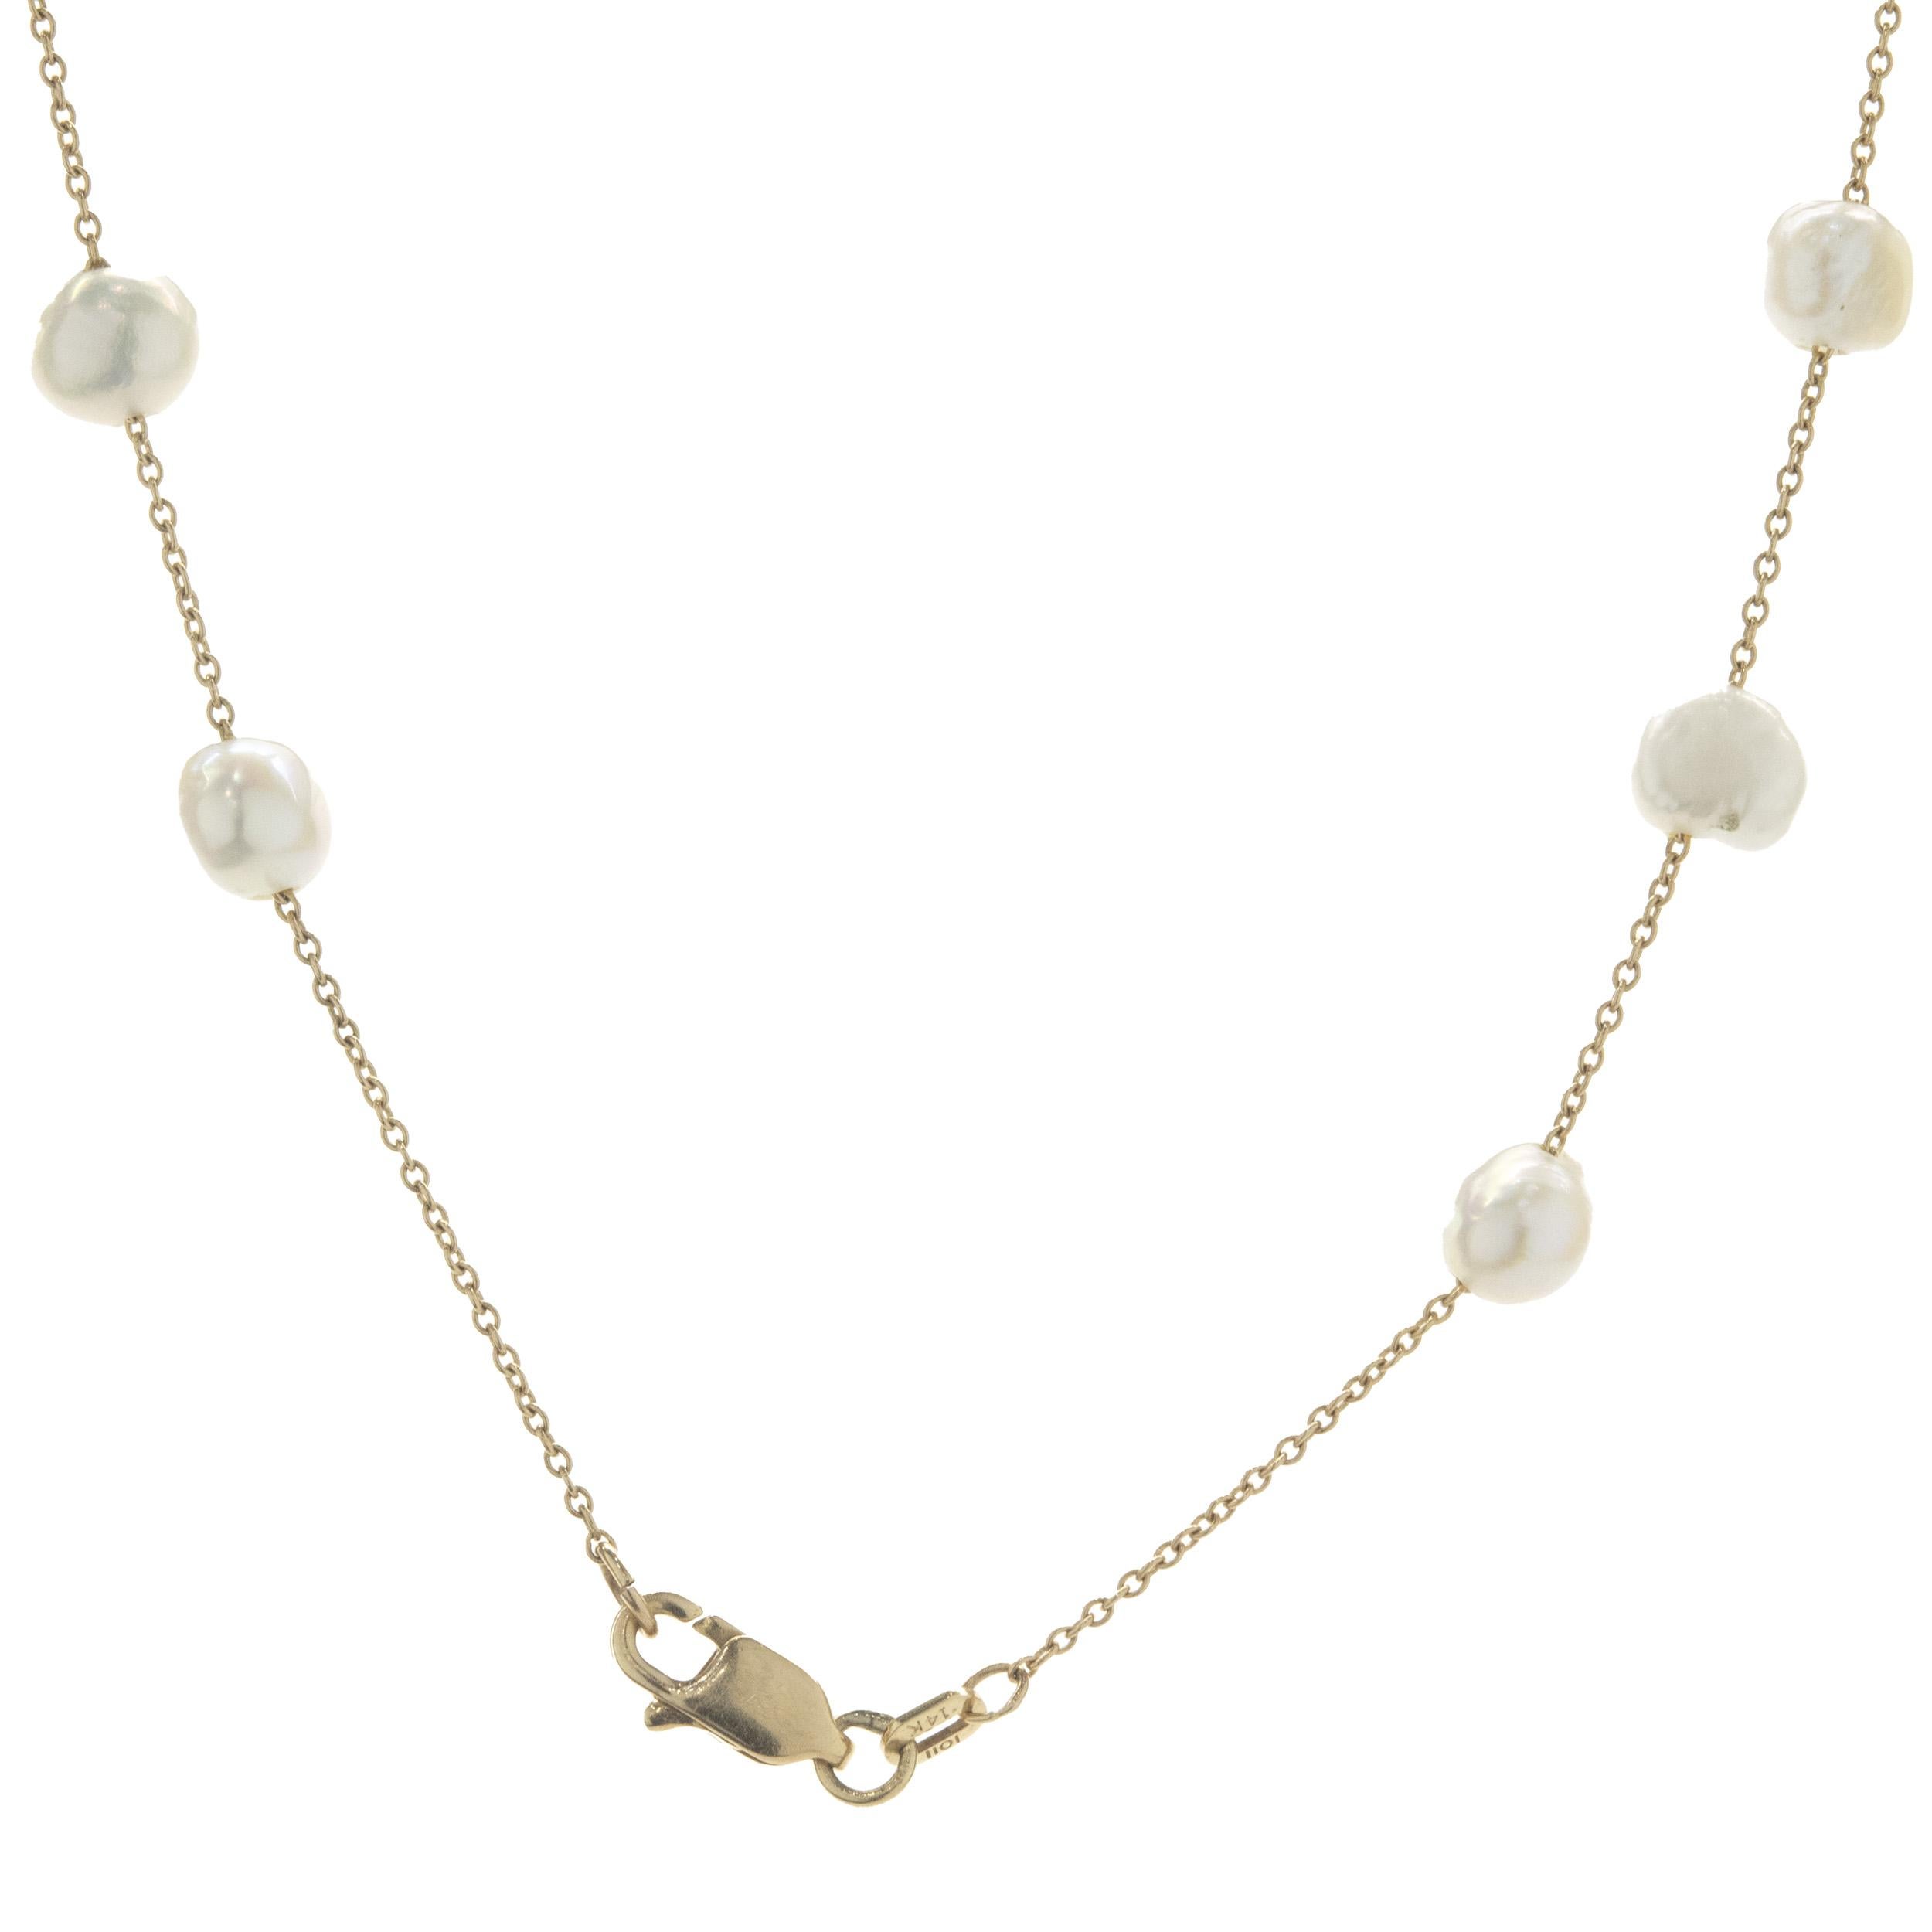 Designer: Custom
Material: 14K yellow gold / pearl
Dimensions: necklace measures 16-inches in length 
Weight: 6.53 grams